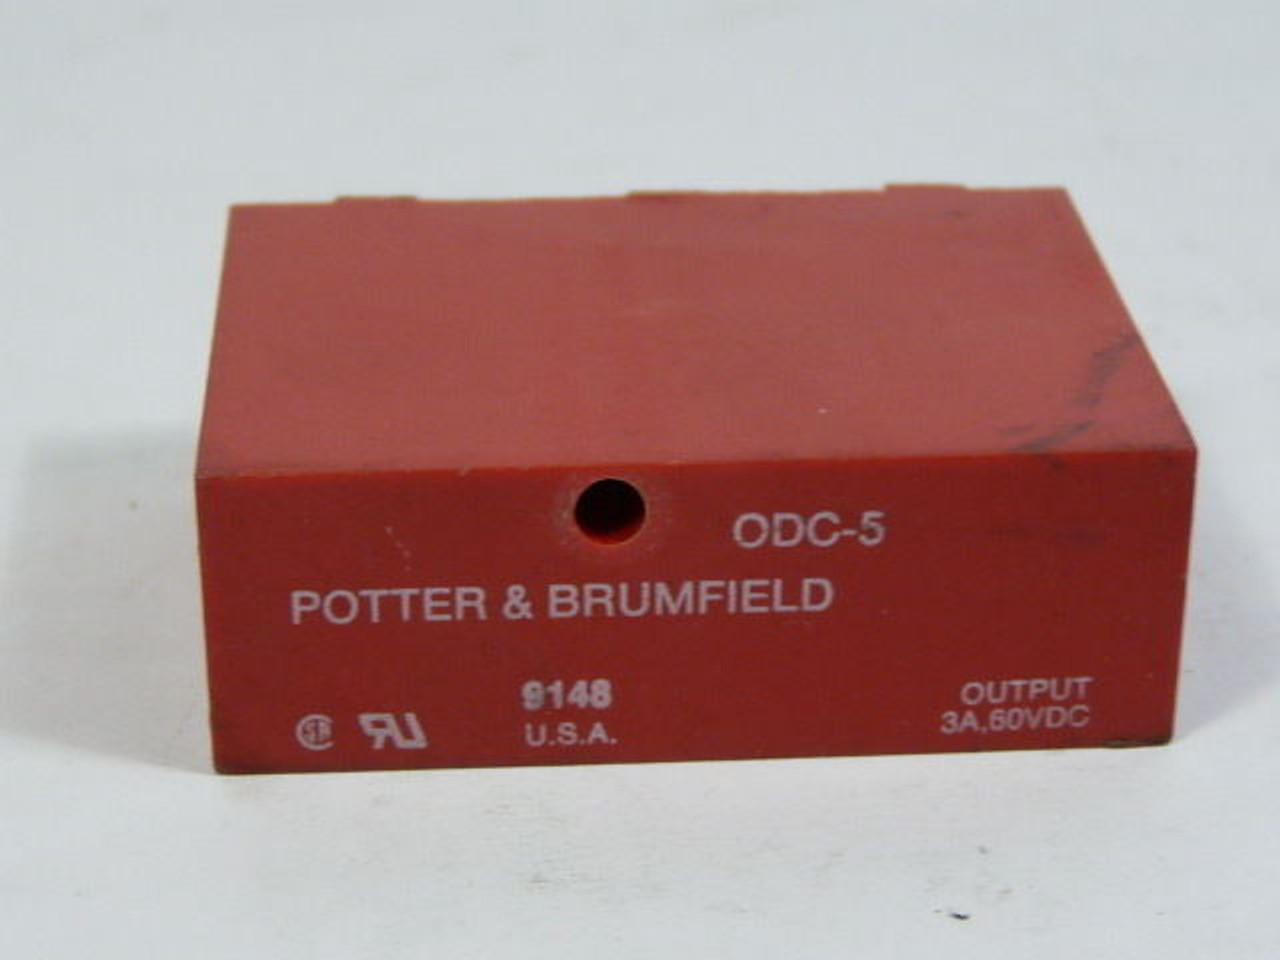 Potter & Brumfield ODC-5 Output Module 3AMP 60VDC USED